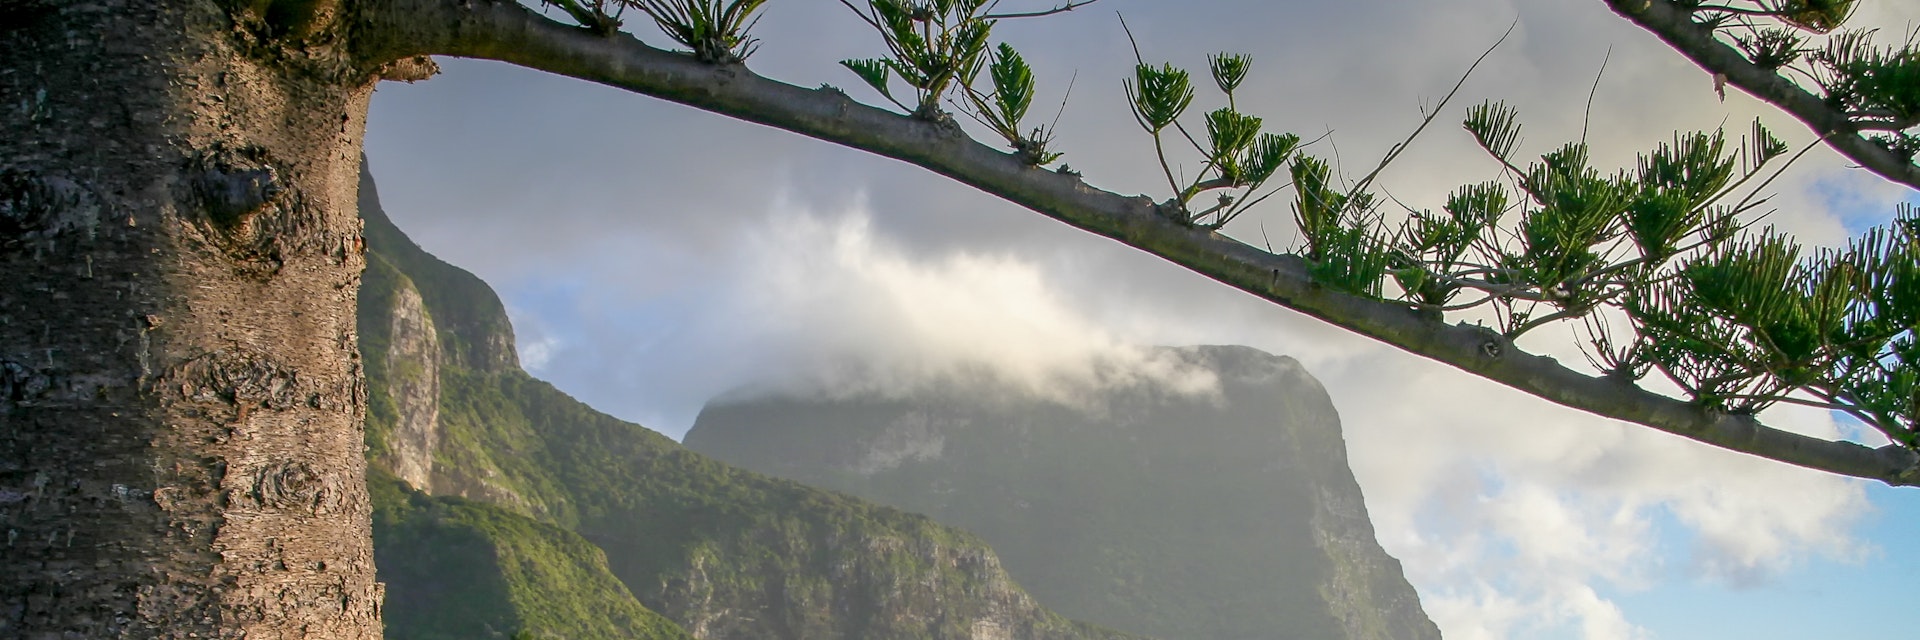 A view of Mt Gower, Lord Howe Island framed by the branches of a Norfolk Pine tree